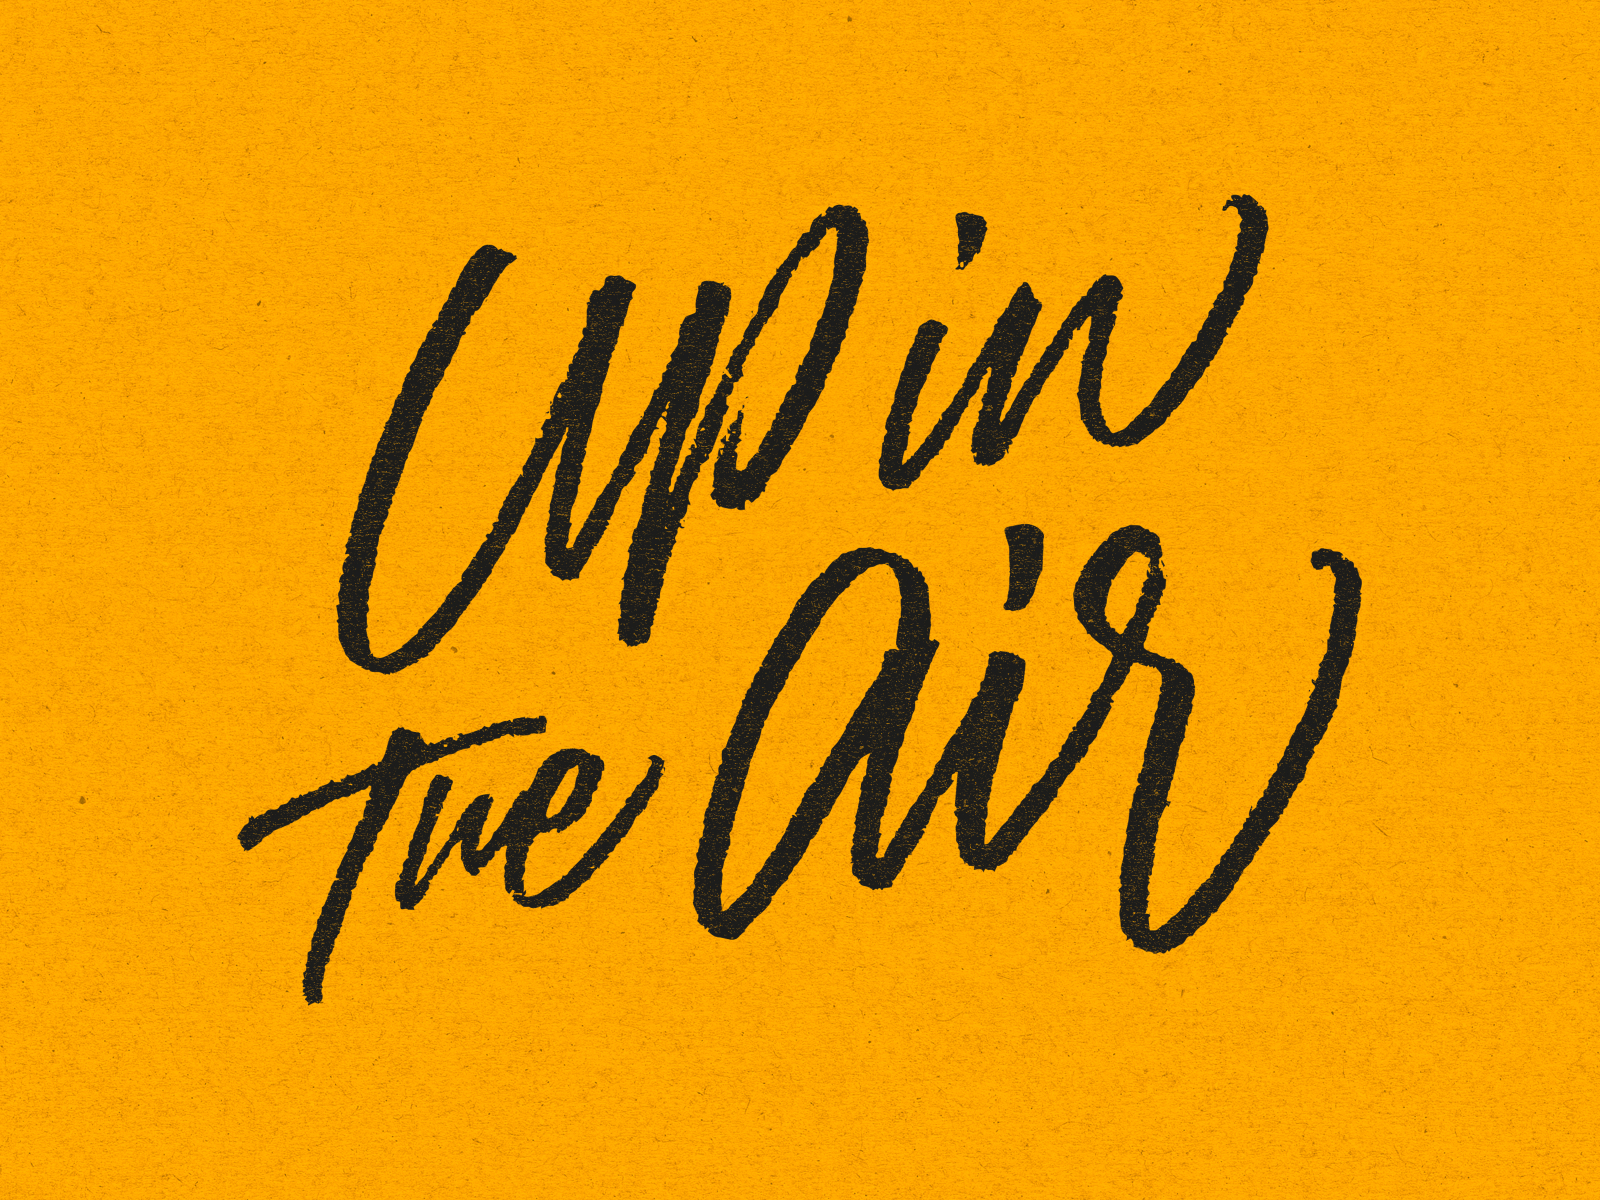 Up in the Air script streetwear graphic design illustration typography calligraphy type lettering